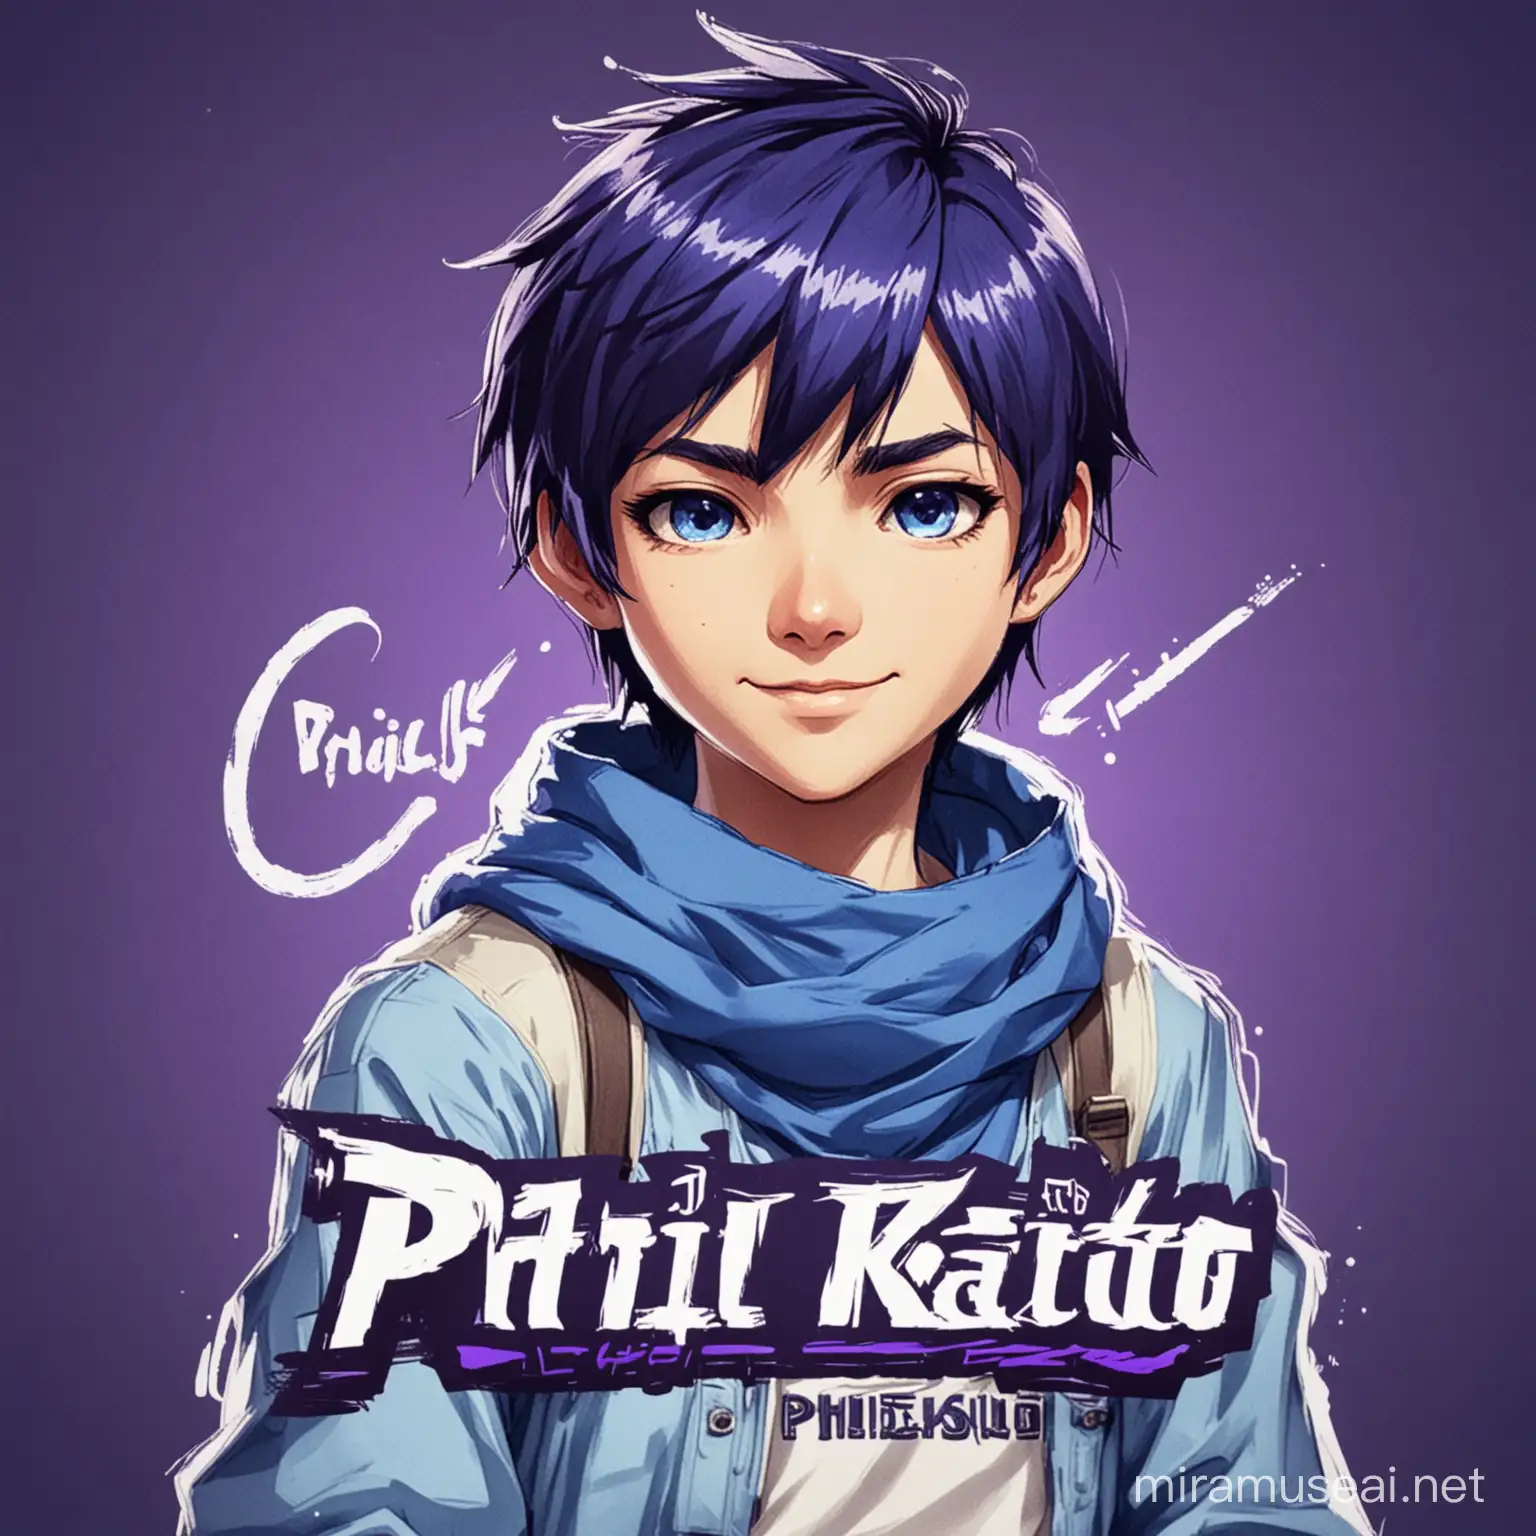 Kaito Kid Themed Twitch Banner with PhilistKaito Inscription